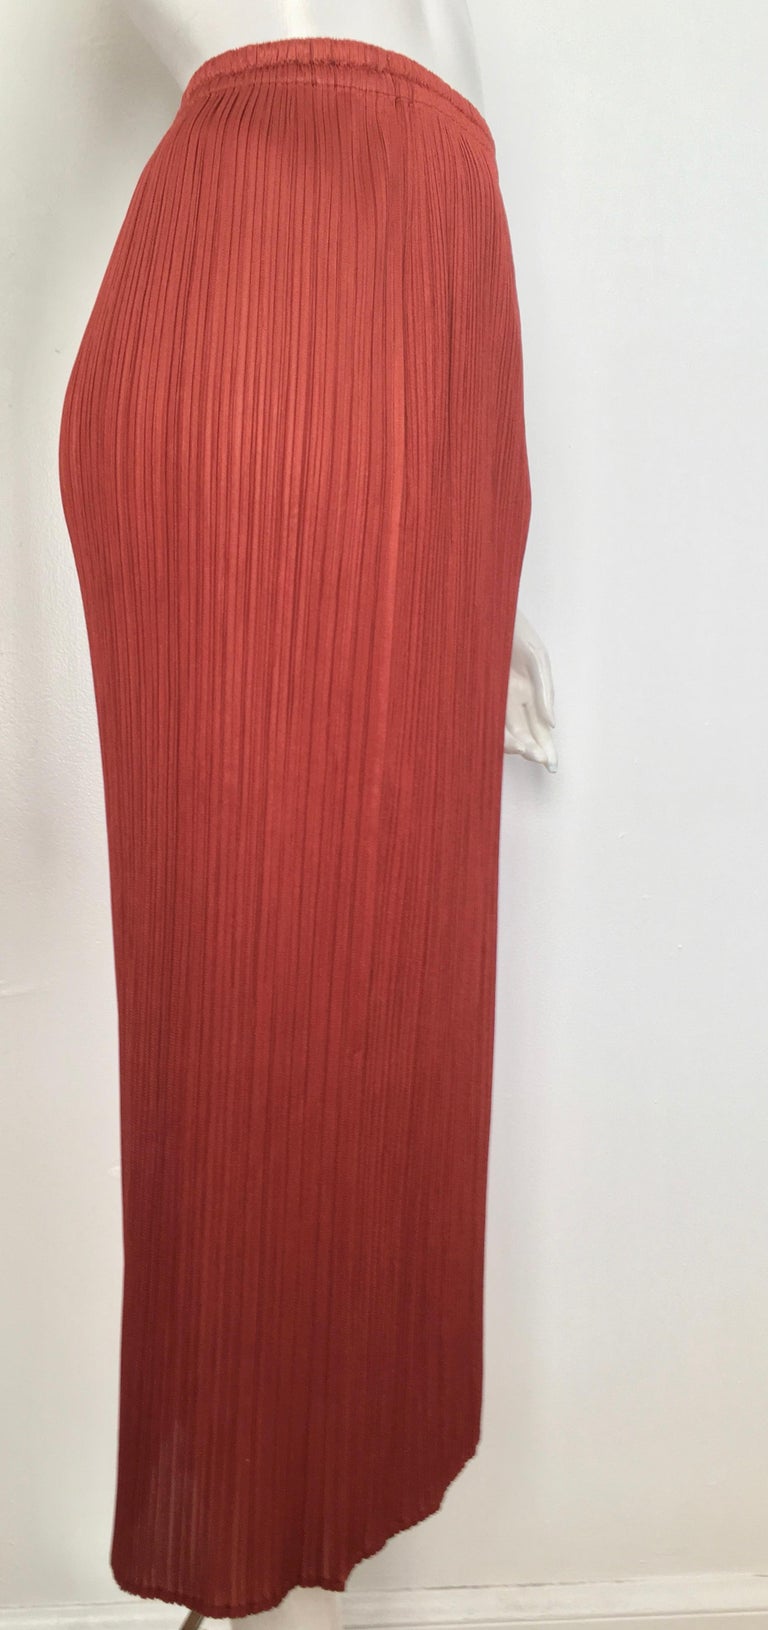 Issey Miyake Pleats Please 1990s Rust Long Skirt Size Small. For Sale ...